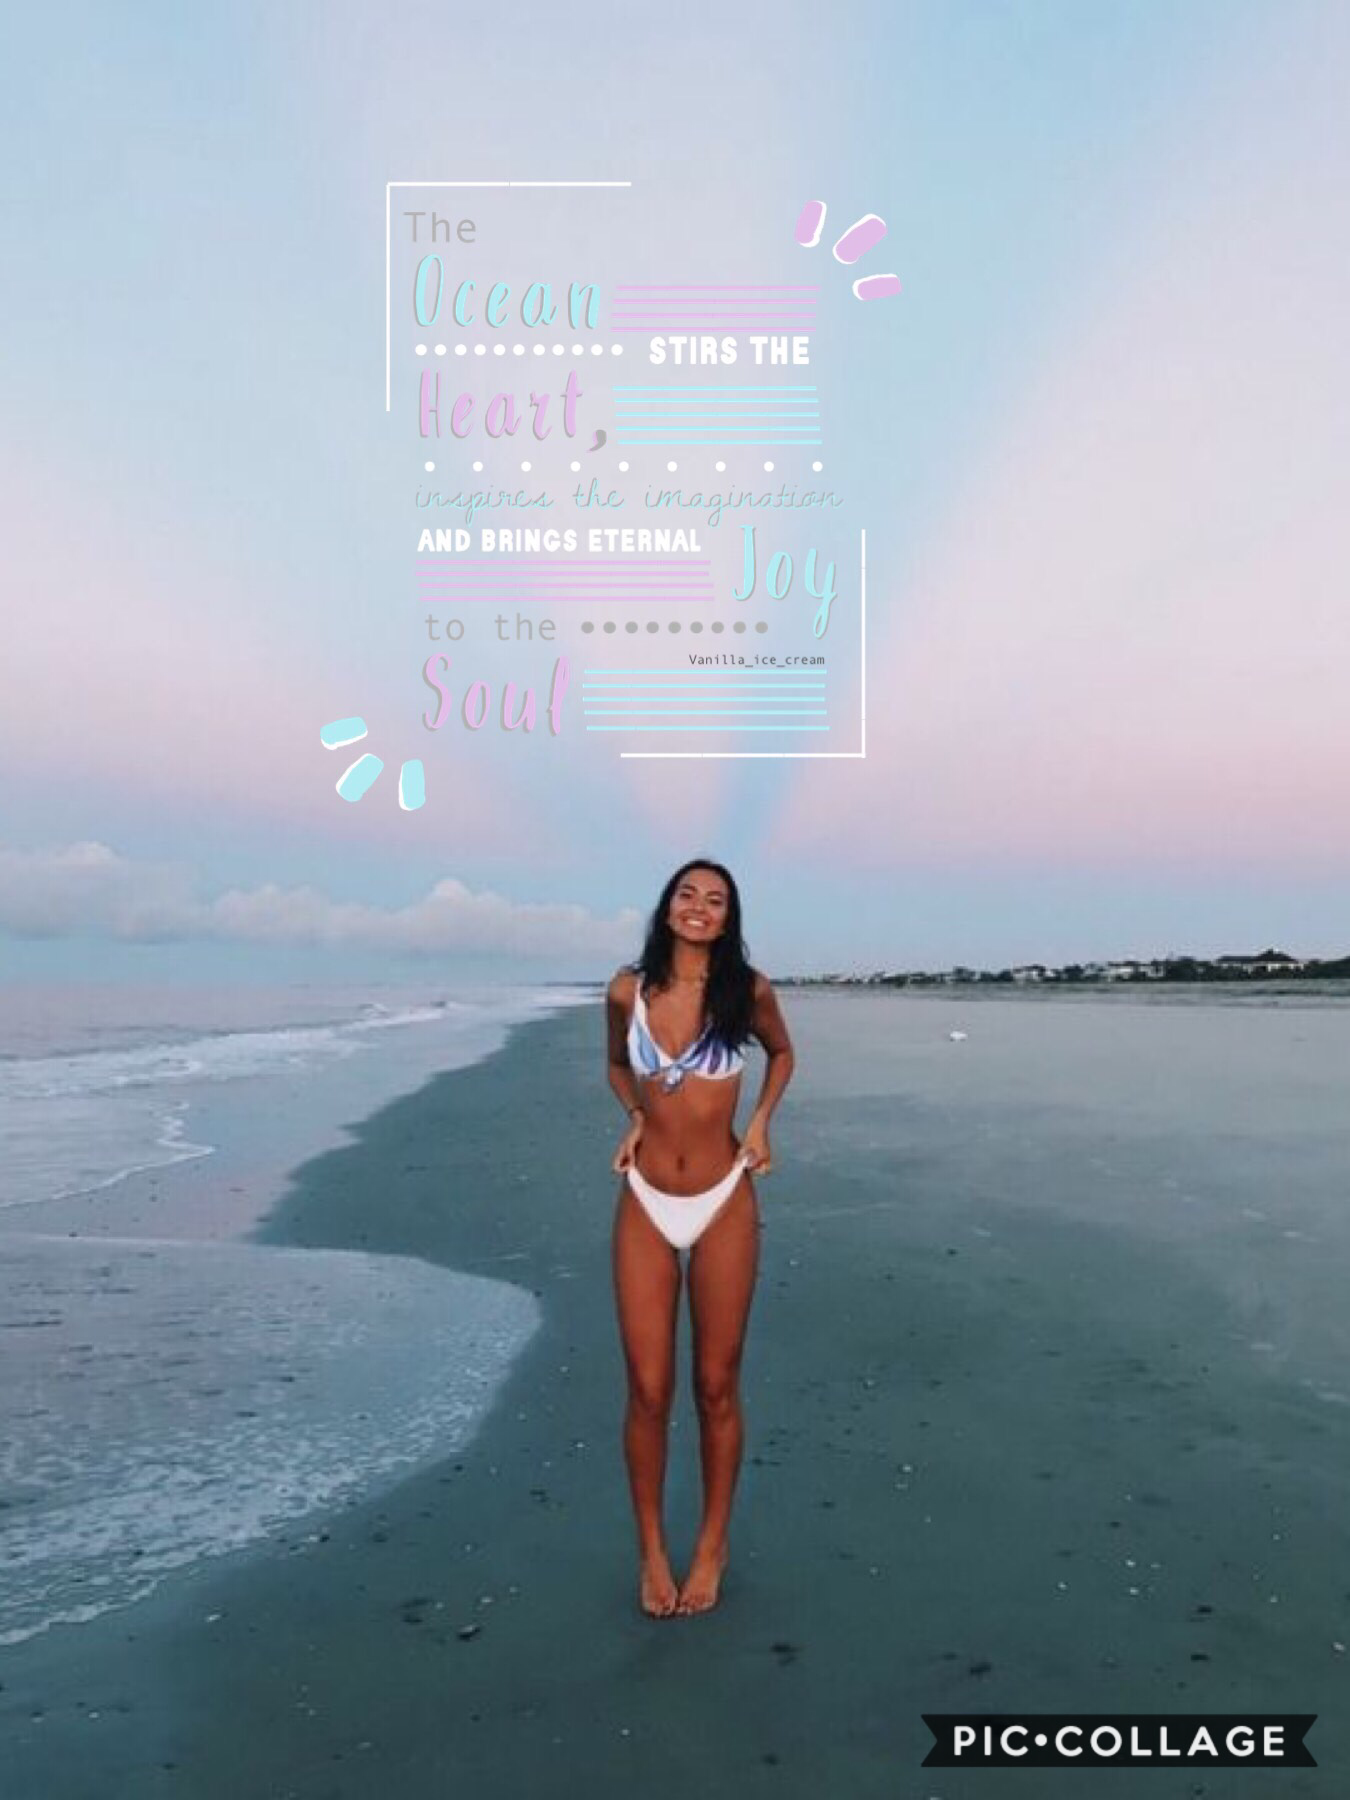 💗Tap💗

Sorry if it’s hard to read the writing against the background

I also found a lot of good beach backgrounds on pinterest so i guess i’m going for a beach-y theme now🌴